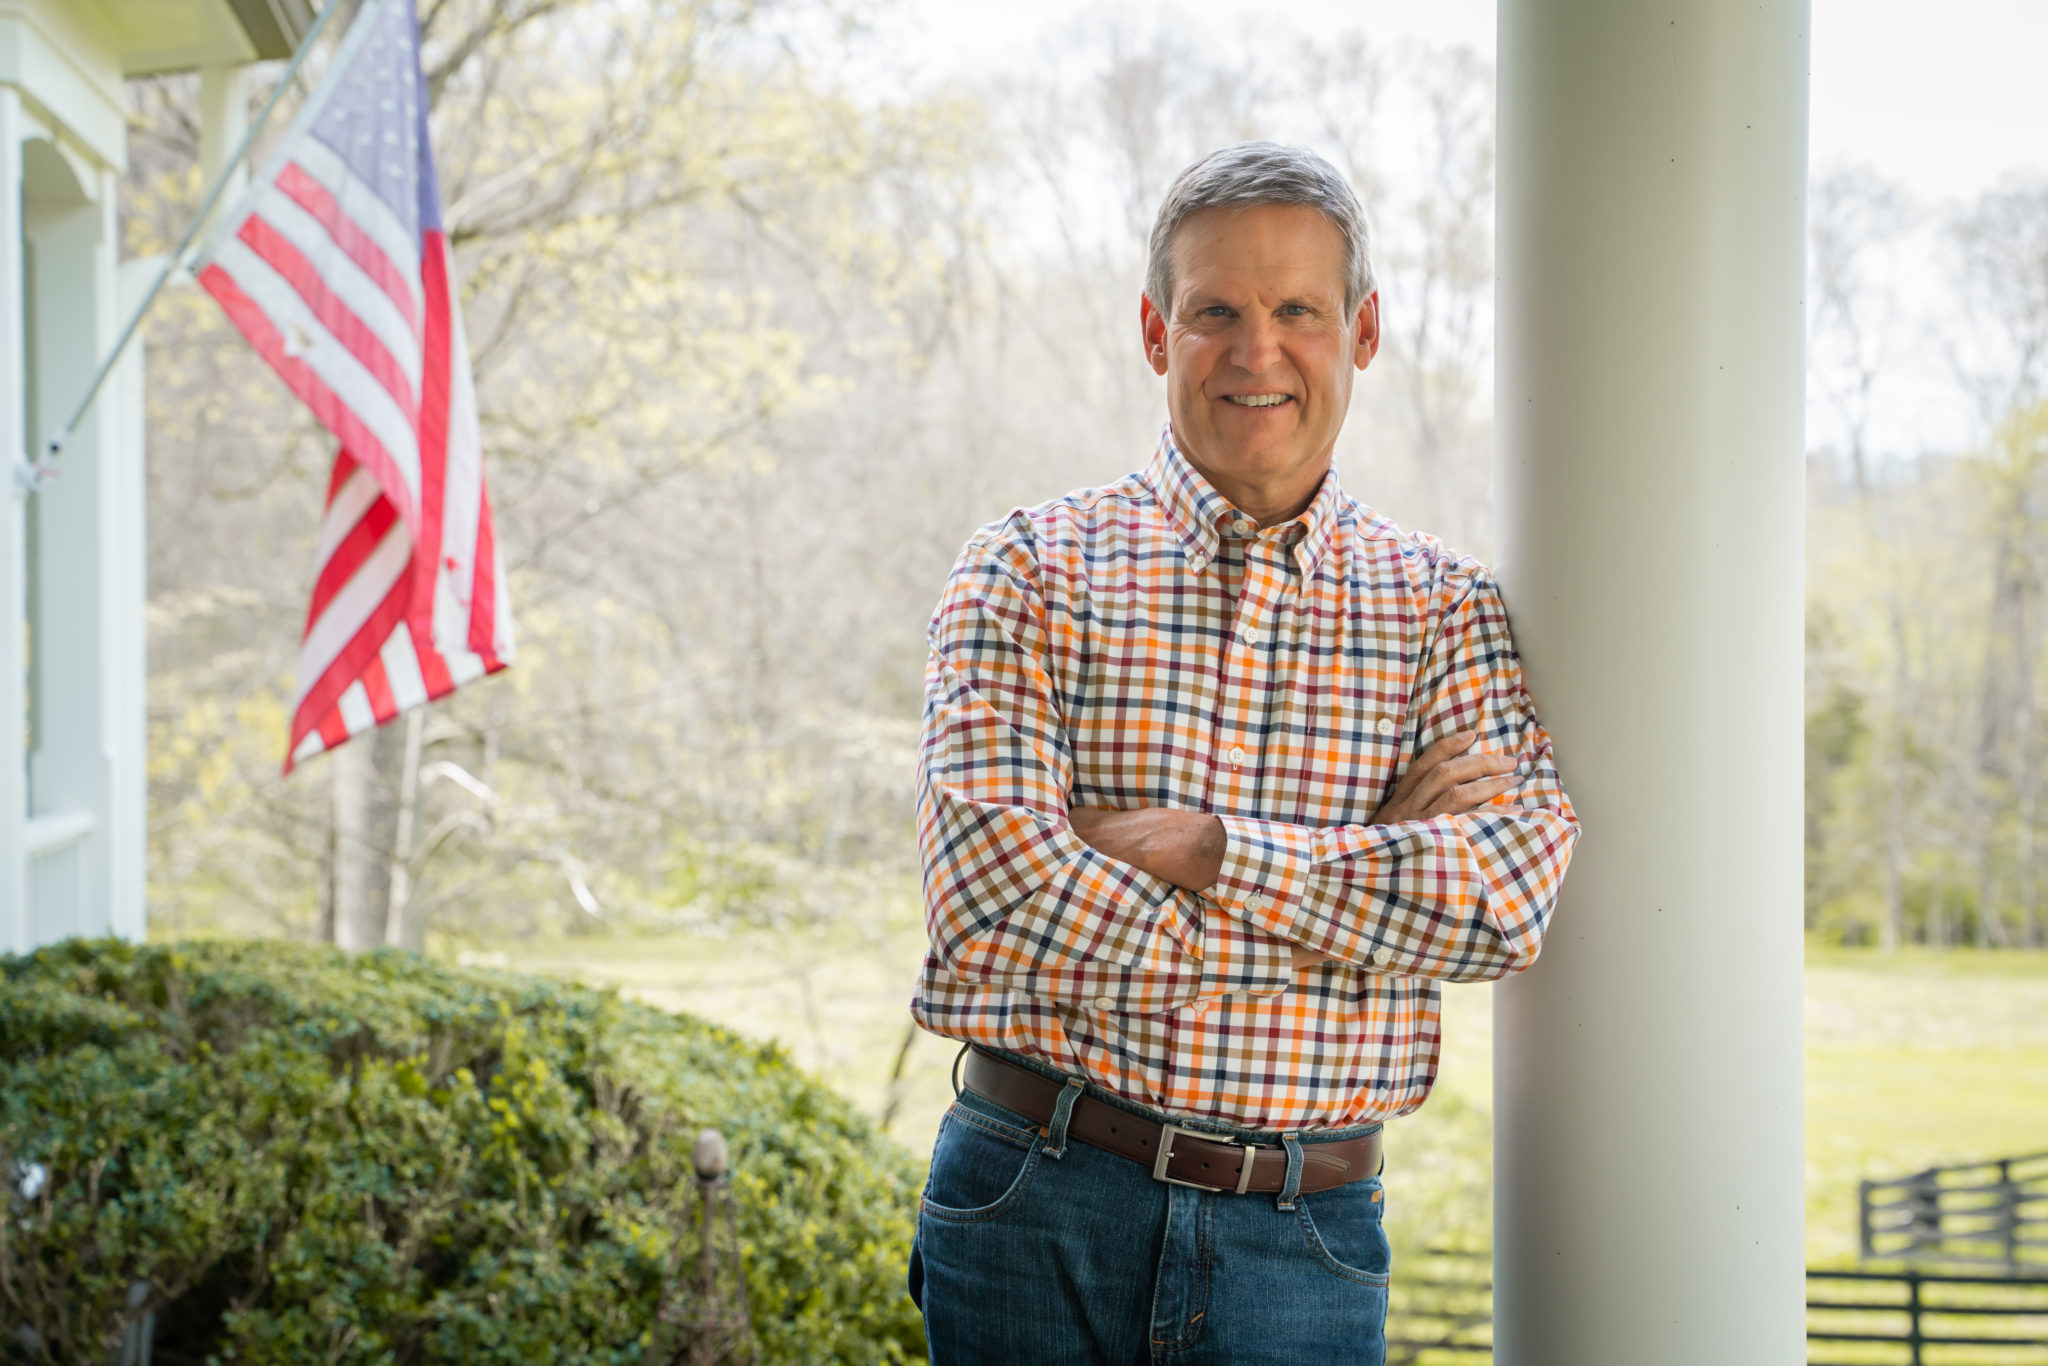  Bill Lee for governor 2022